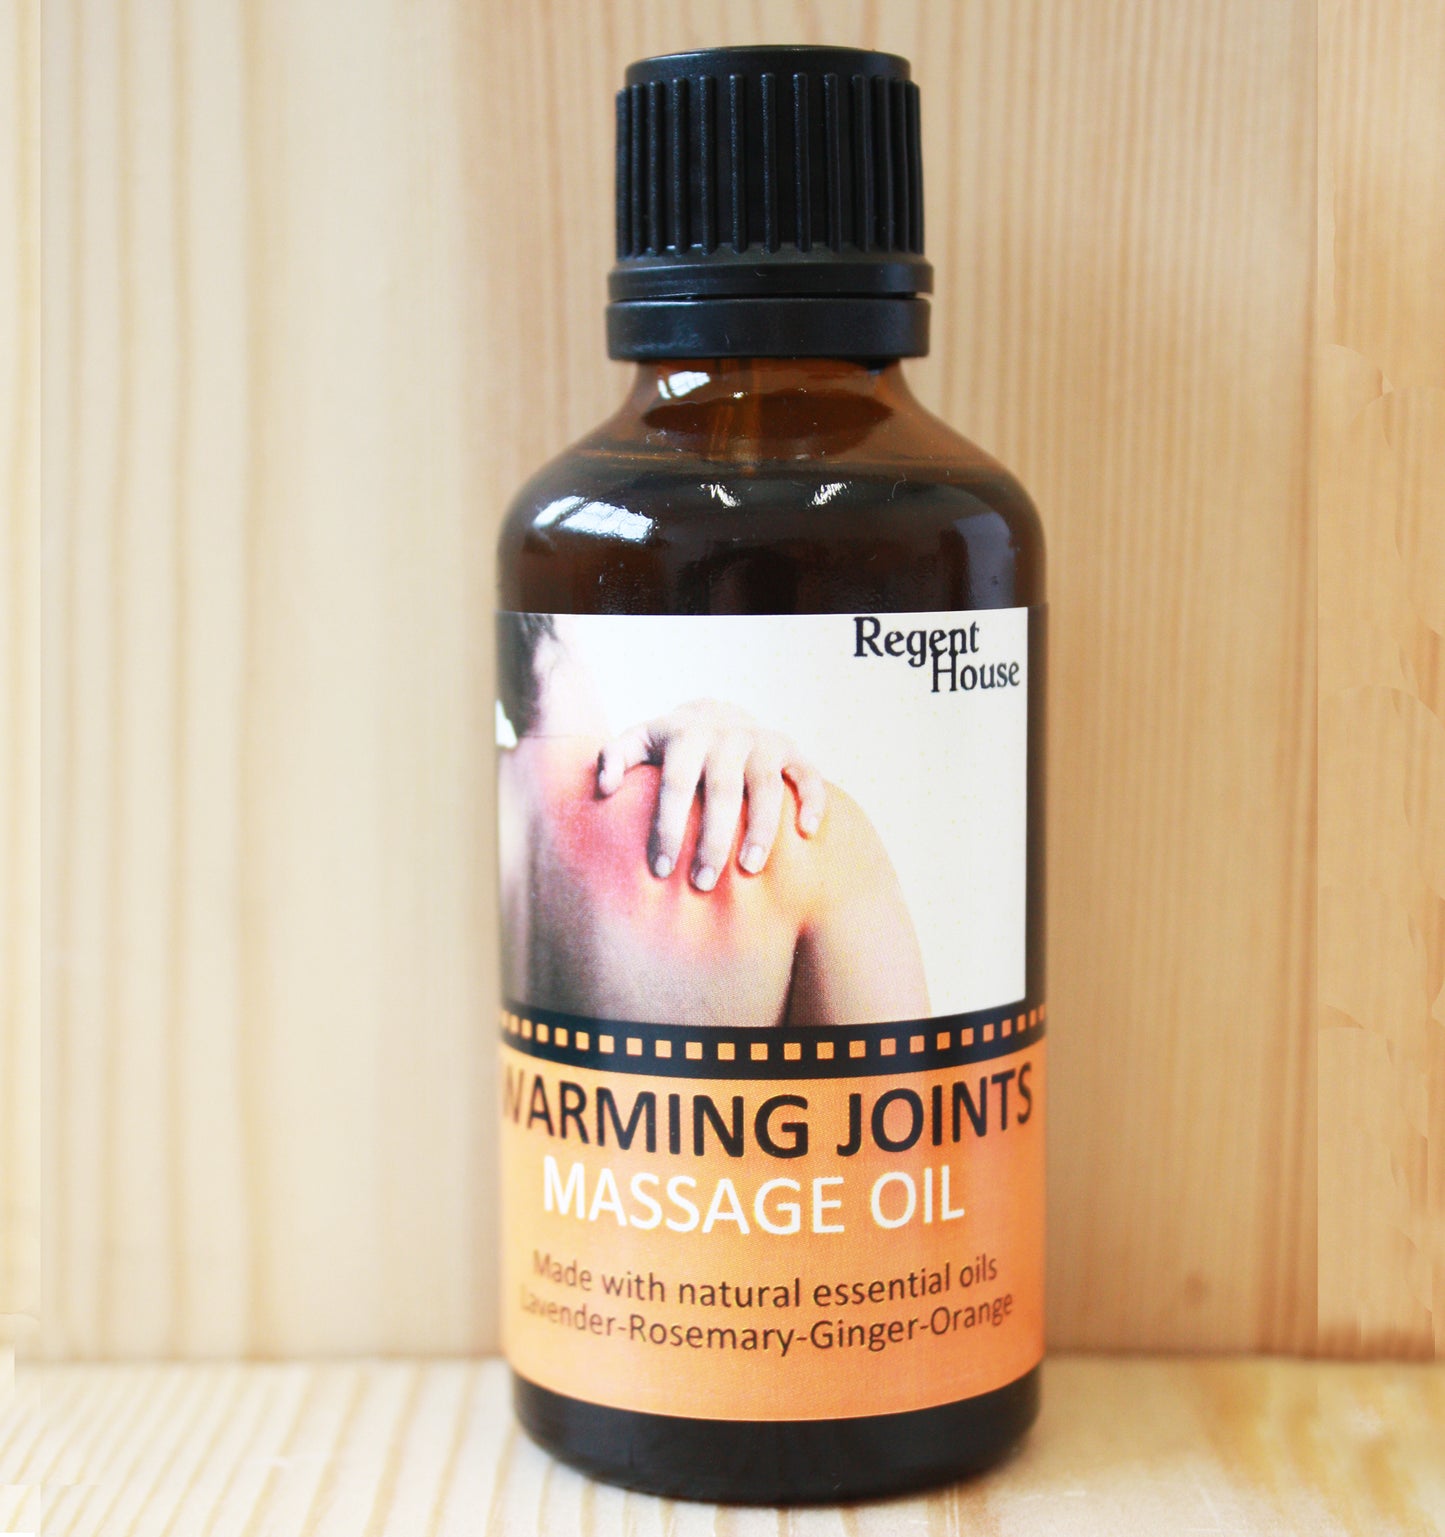 Warming Joints Massage Oil